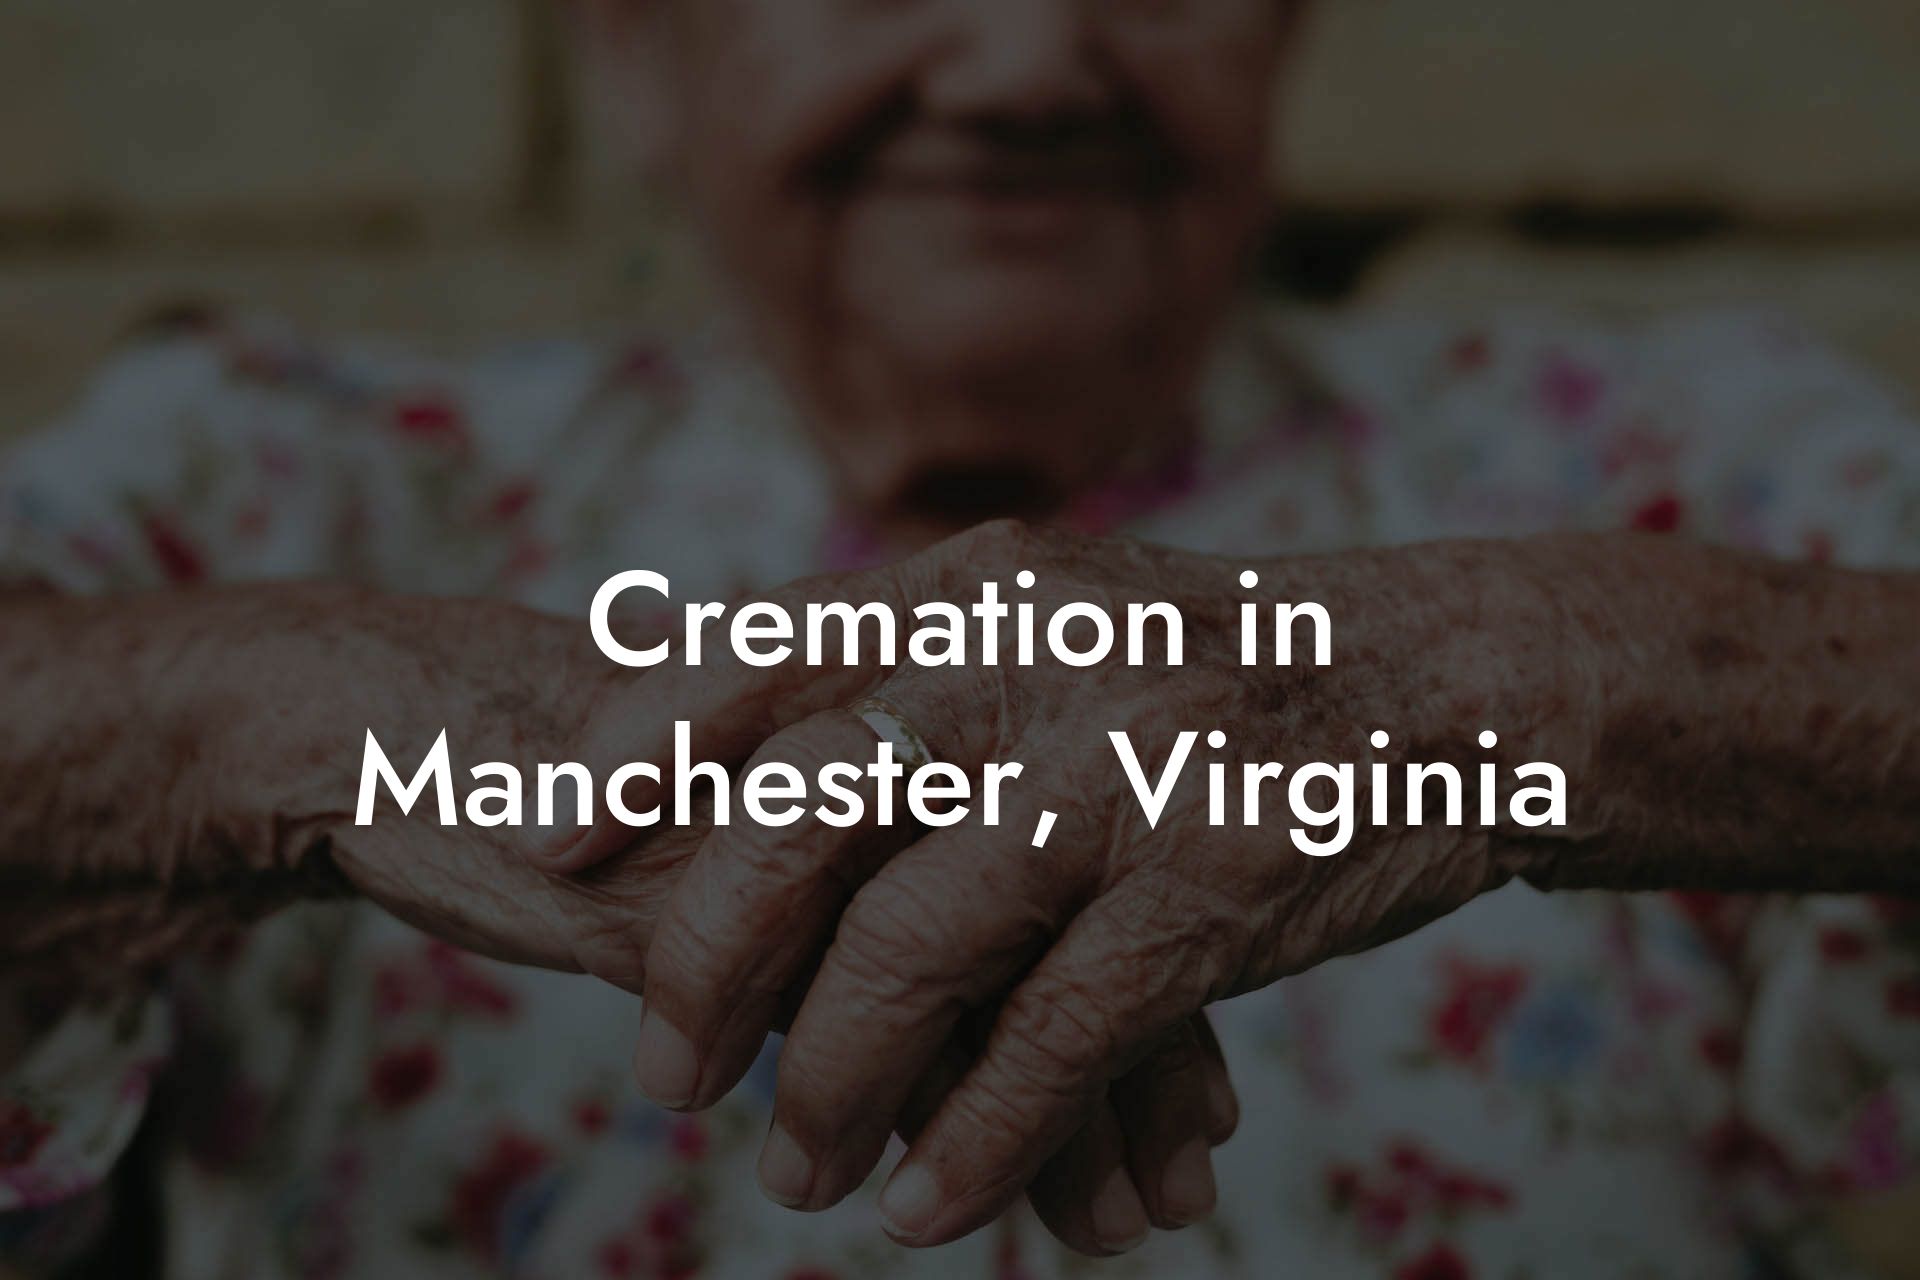 Cremation in Manchester, Virginia